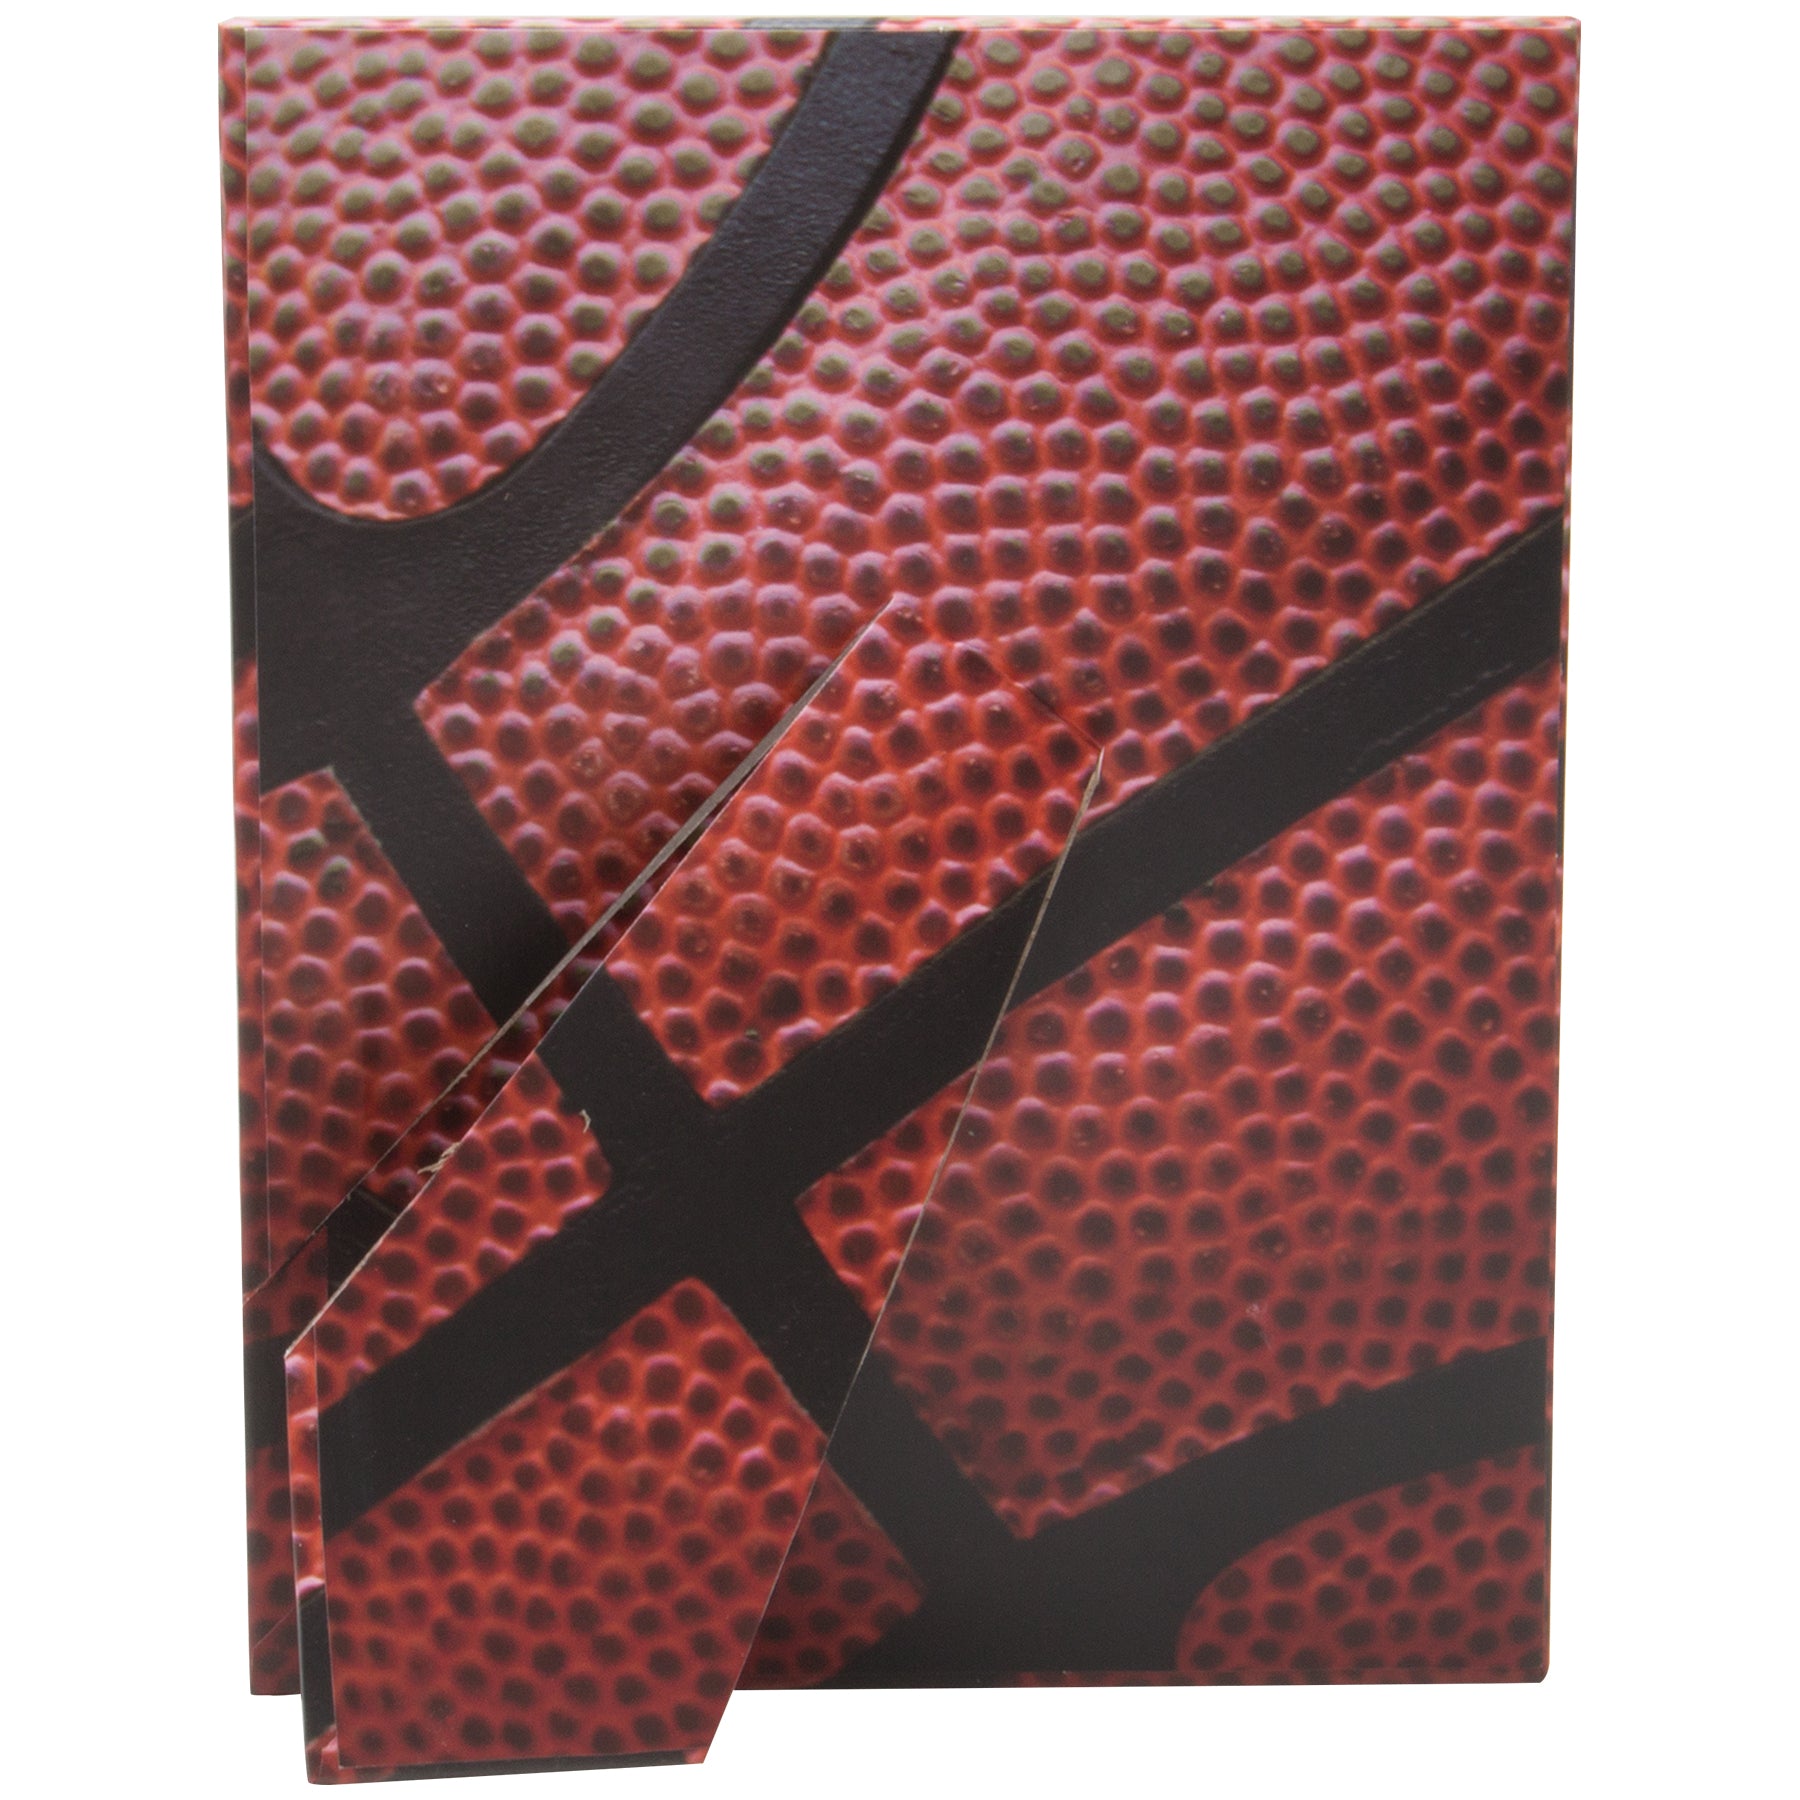 Basketball Paper Picture Frame